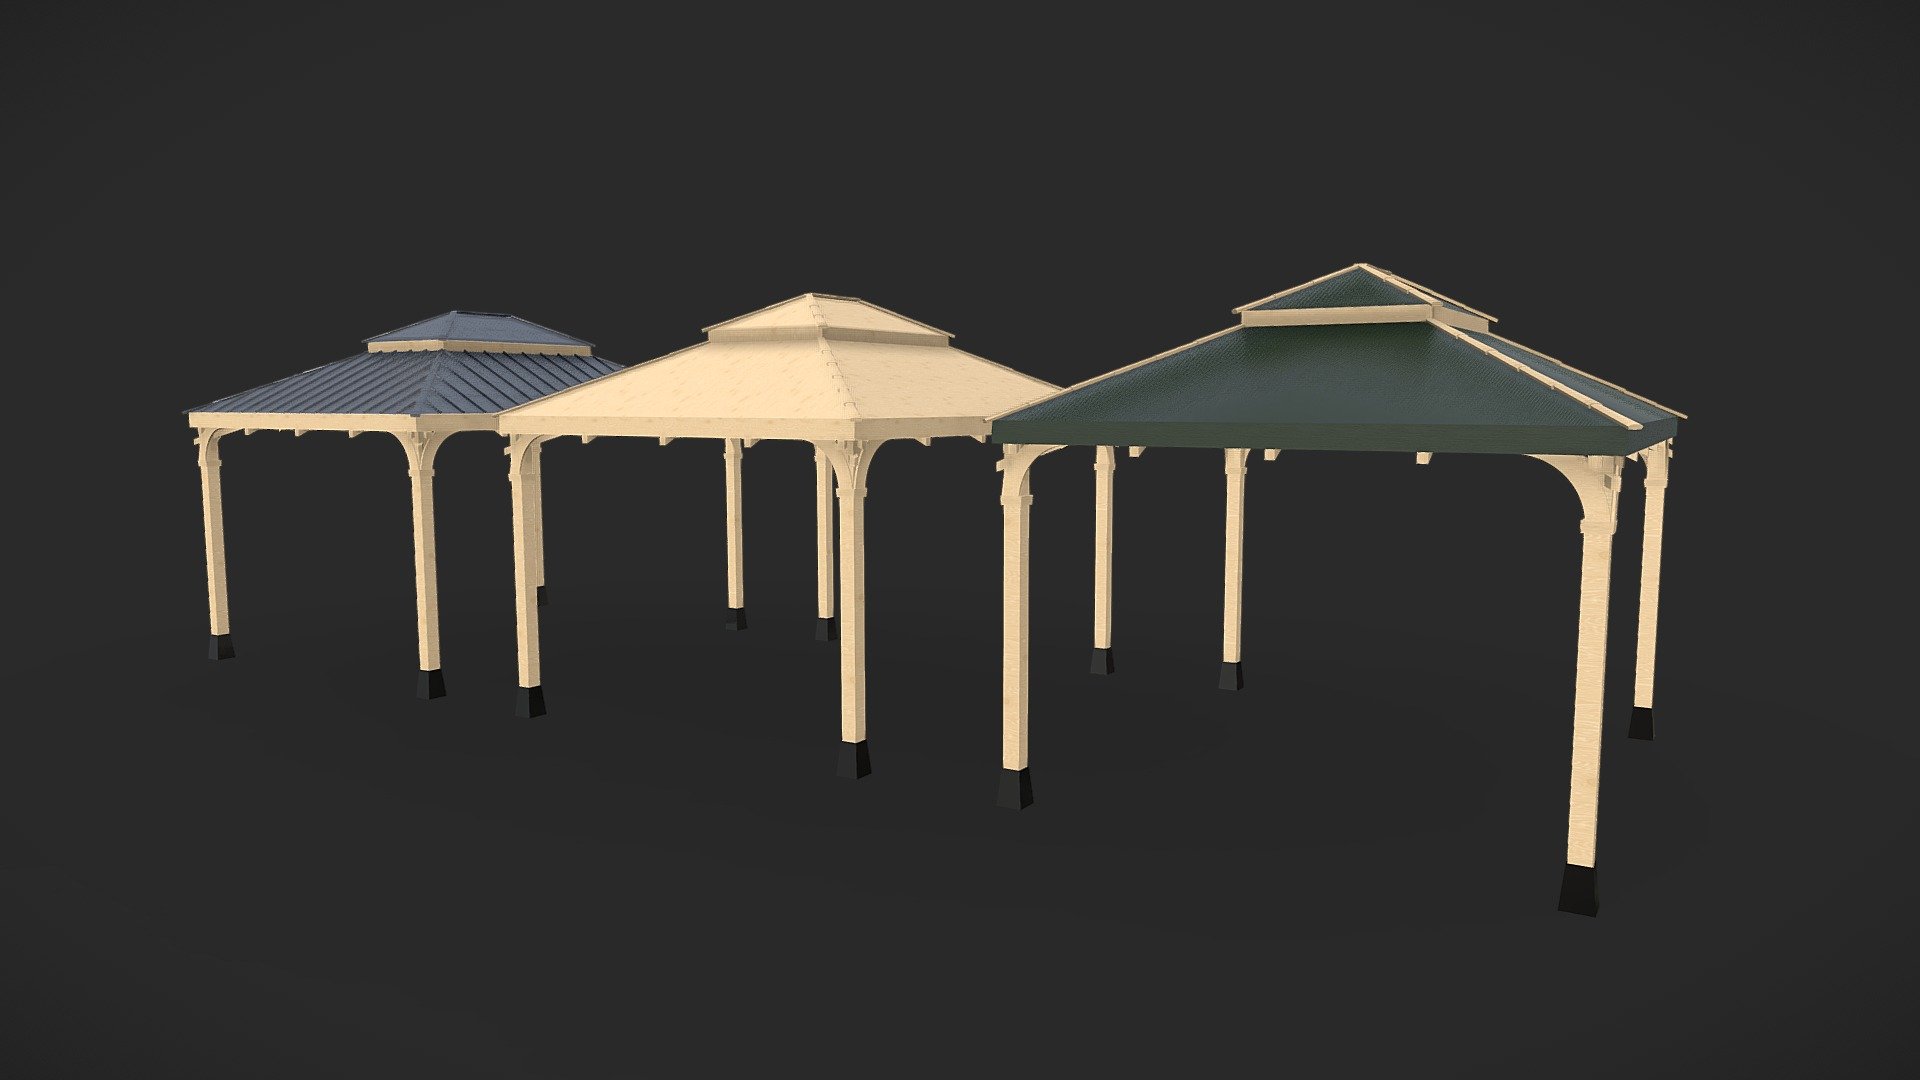 Outdoor Patio Cover ready for archviz.
Upgrade that backyard with a besutiful patio structure.

UV mapped 3d model